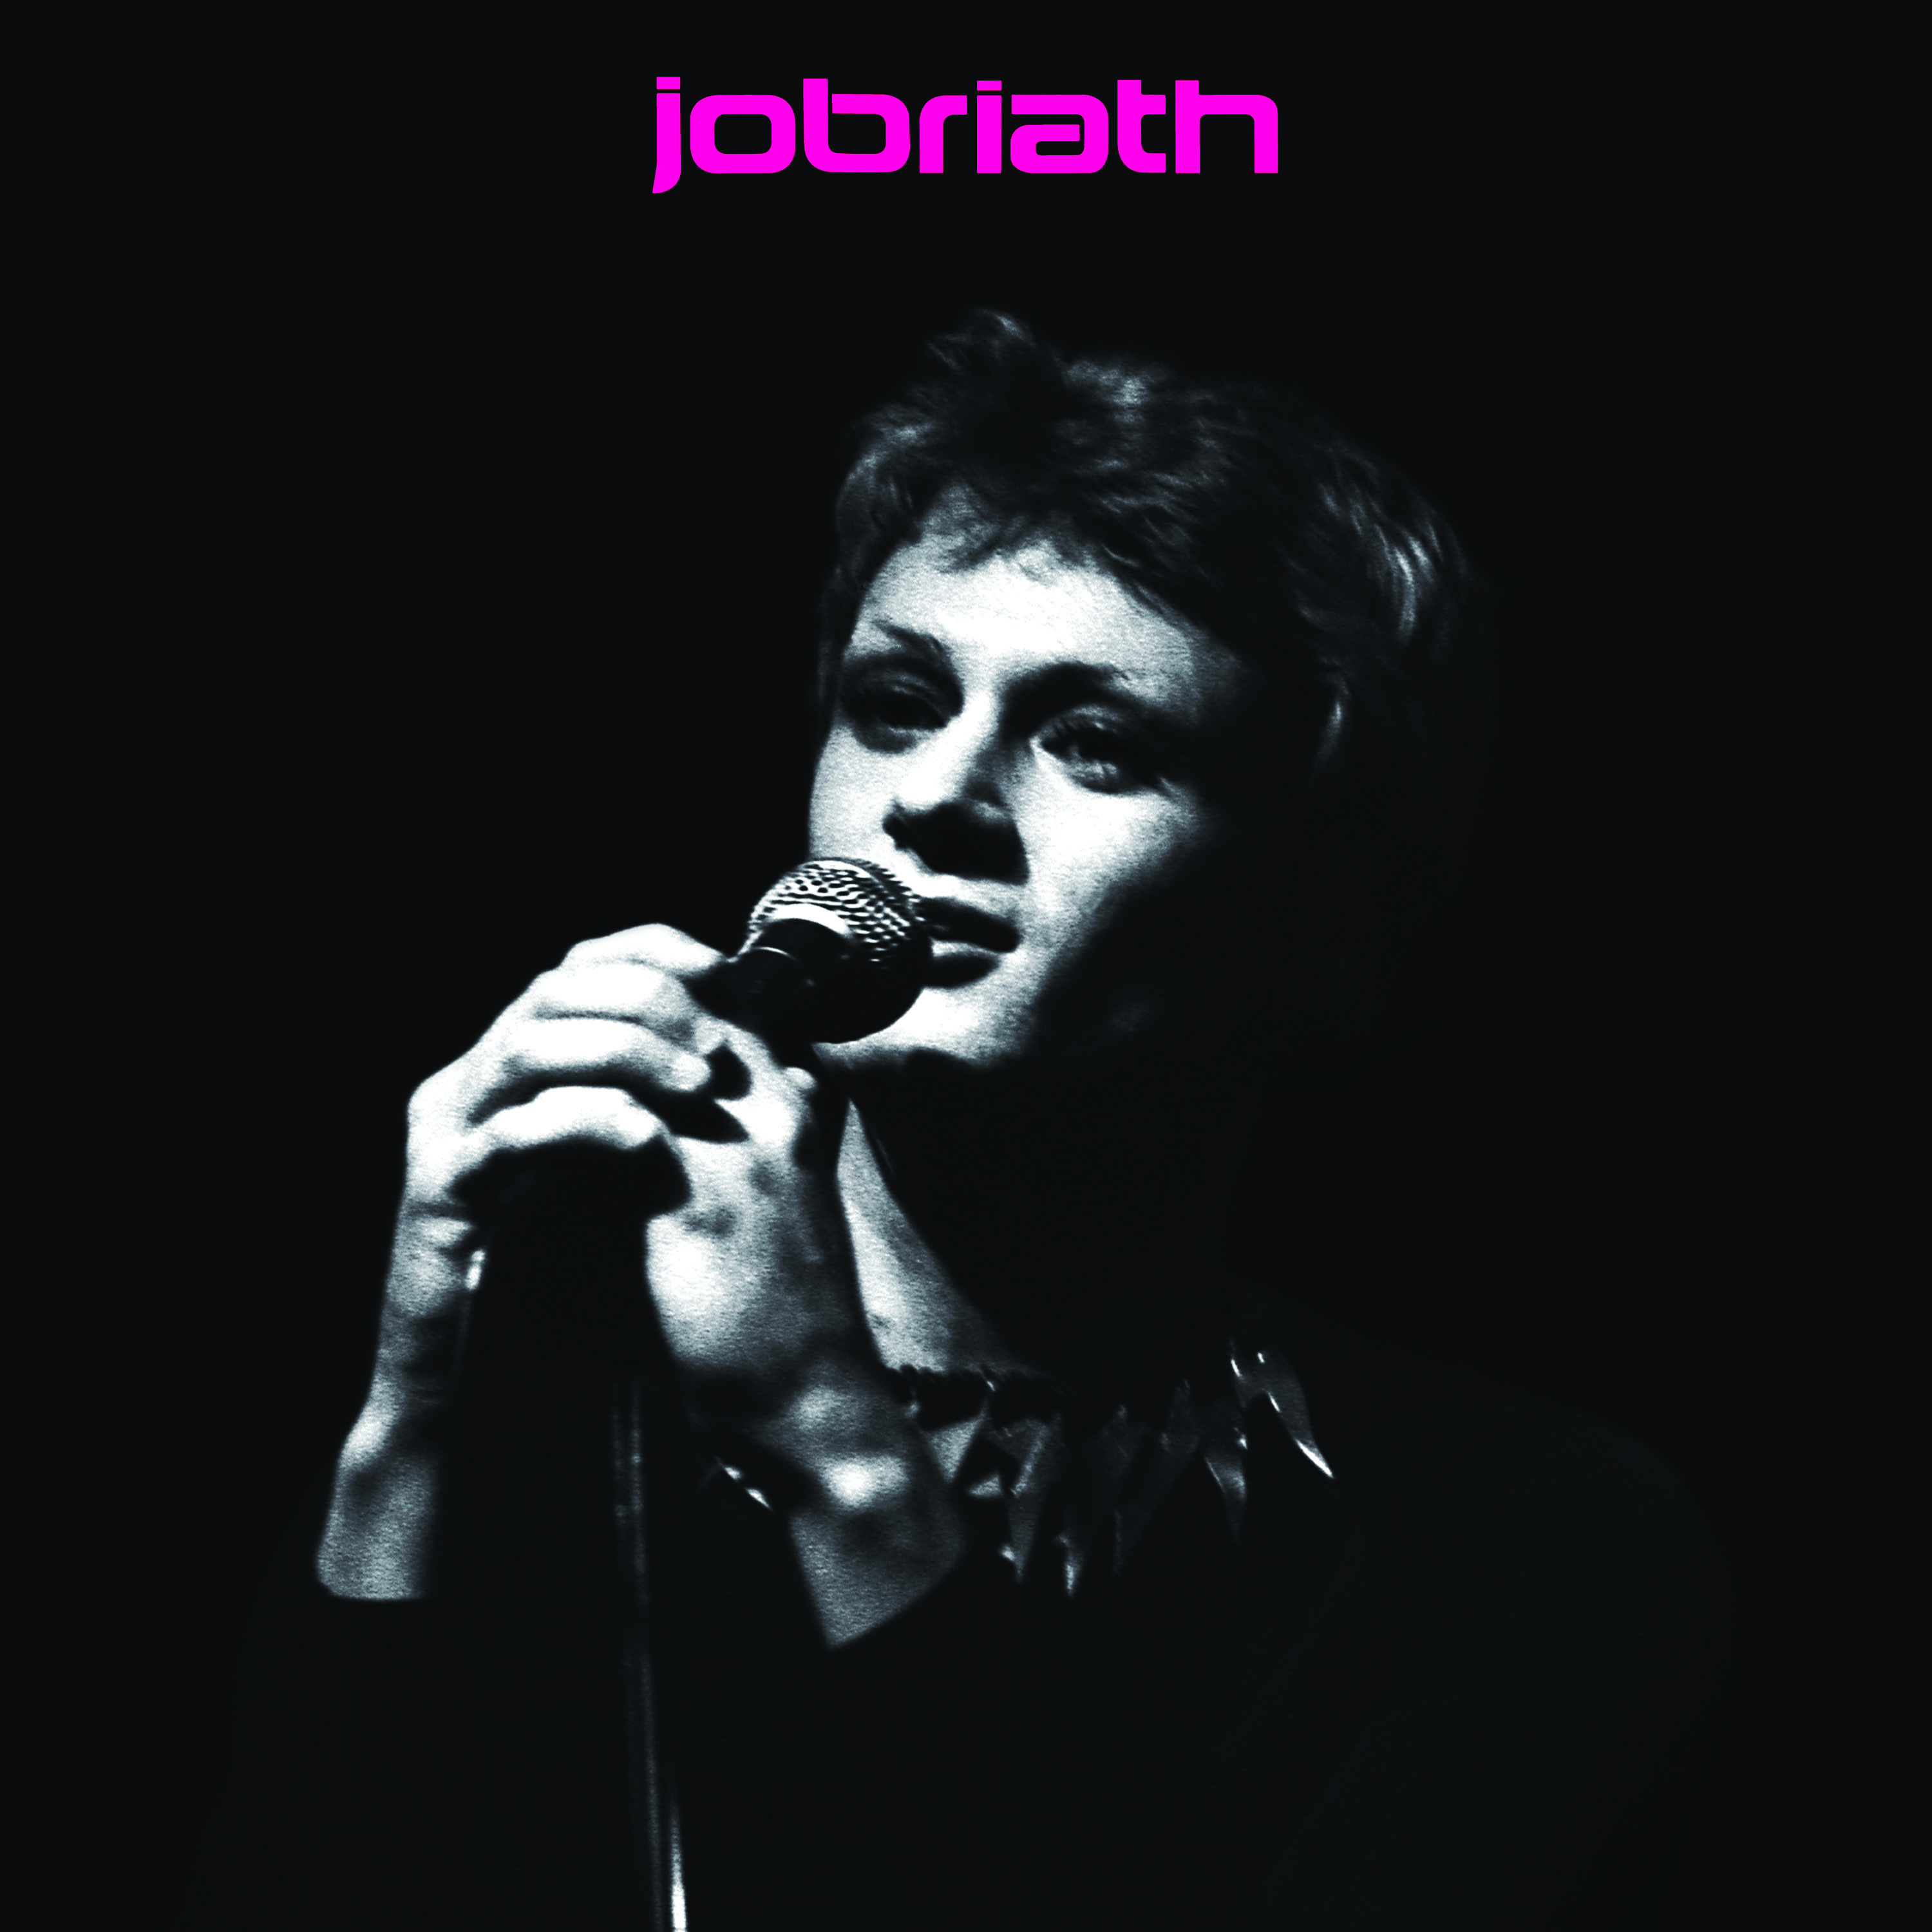 The cover of Jobriath's 2013 EP